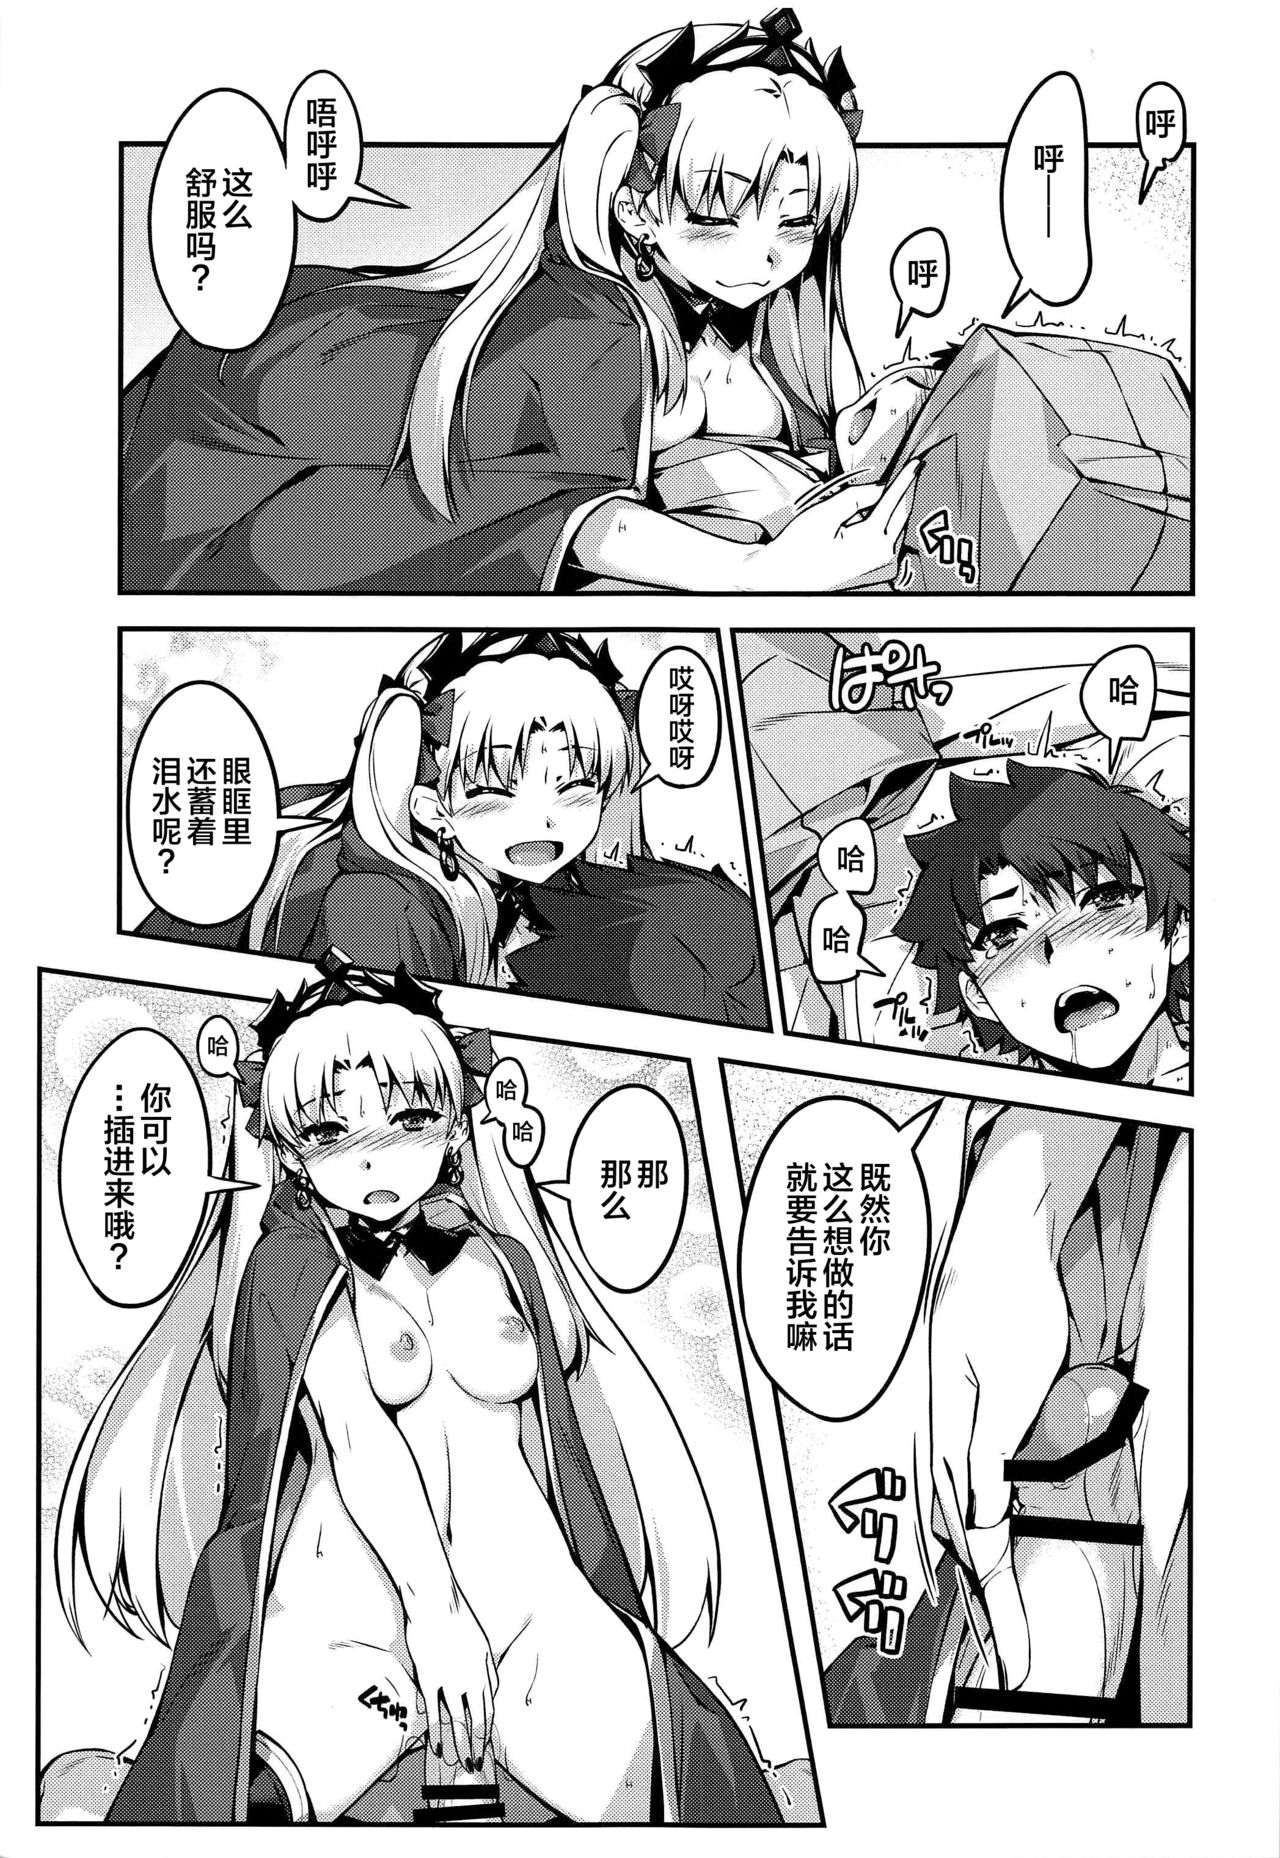 (C97) [Kansyouyou Marmotte (Mr.Lostman)] Hiroigui. (Fate/Grand Order) [Chinese] [黎欧×新桥月白日语社] page 12 full